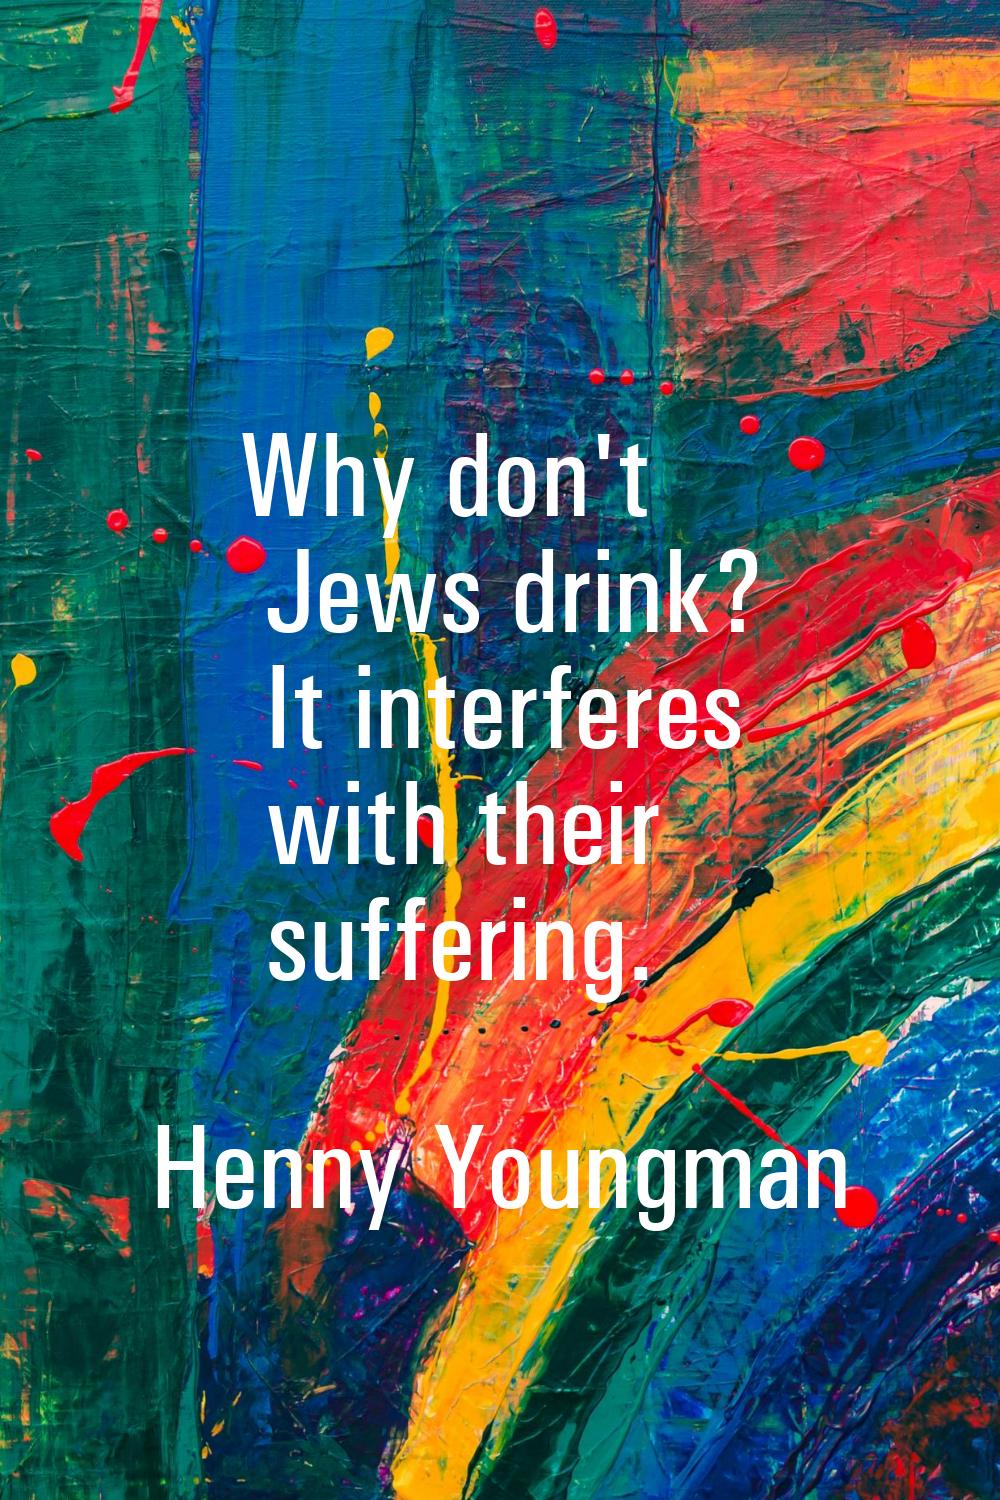 Why don't Jews drink? It interferes with their suffering.